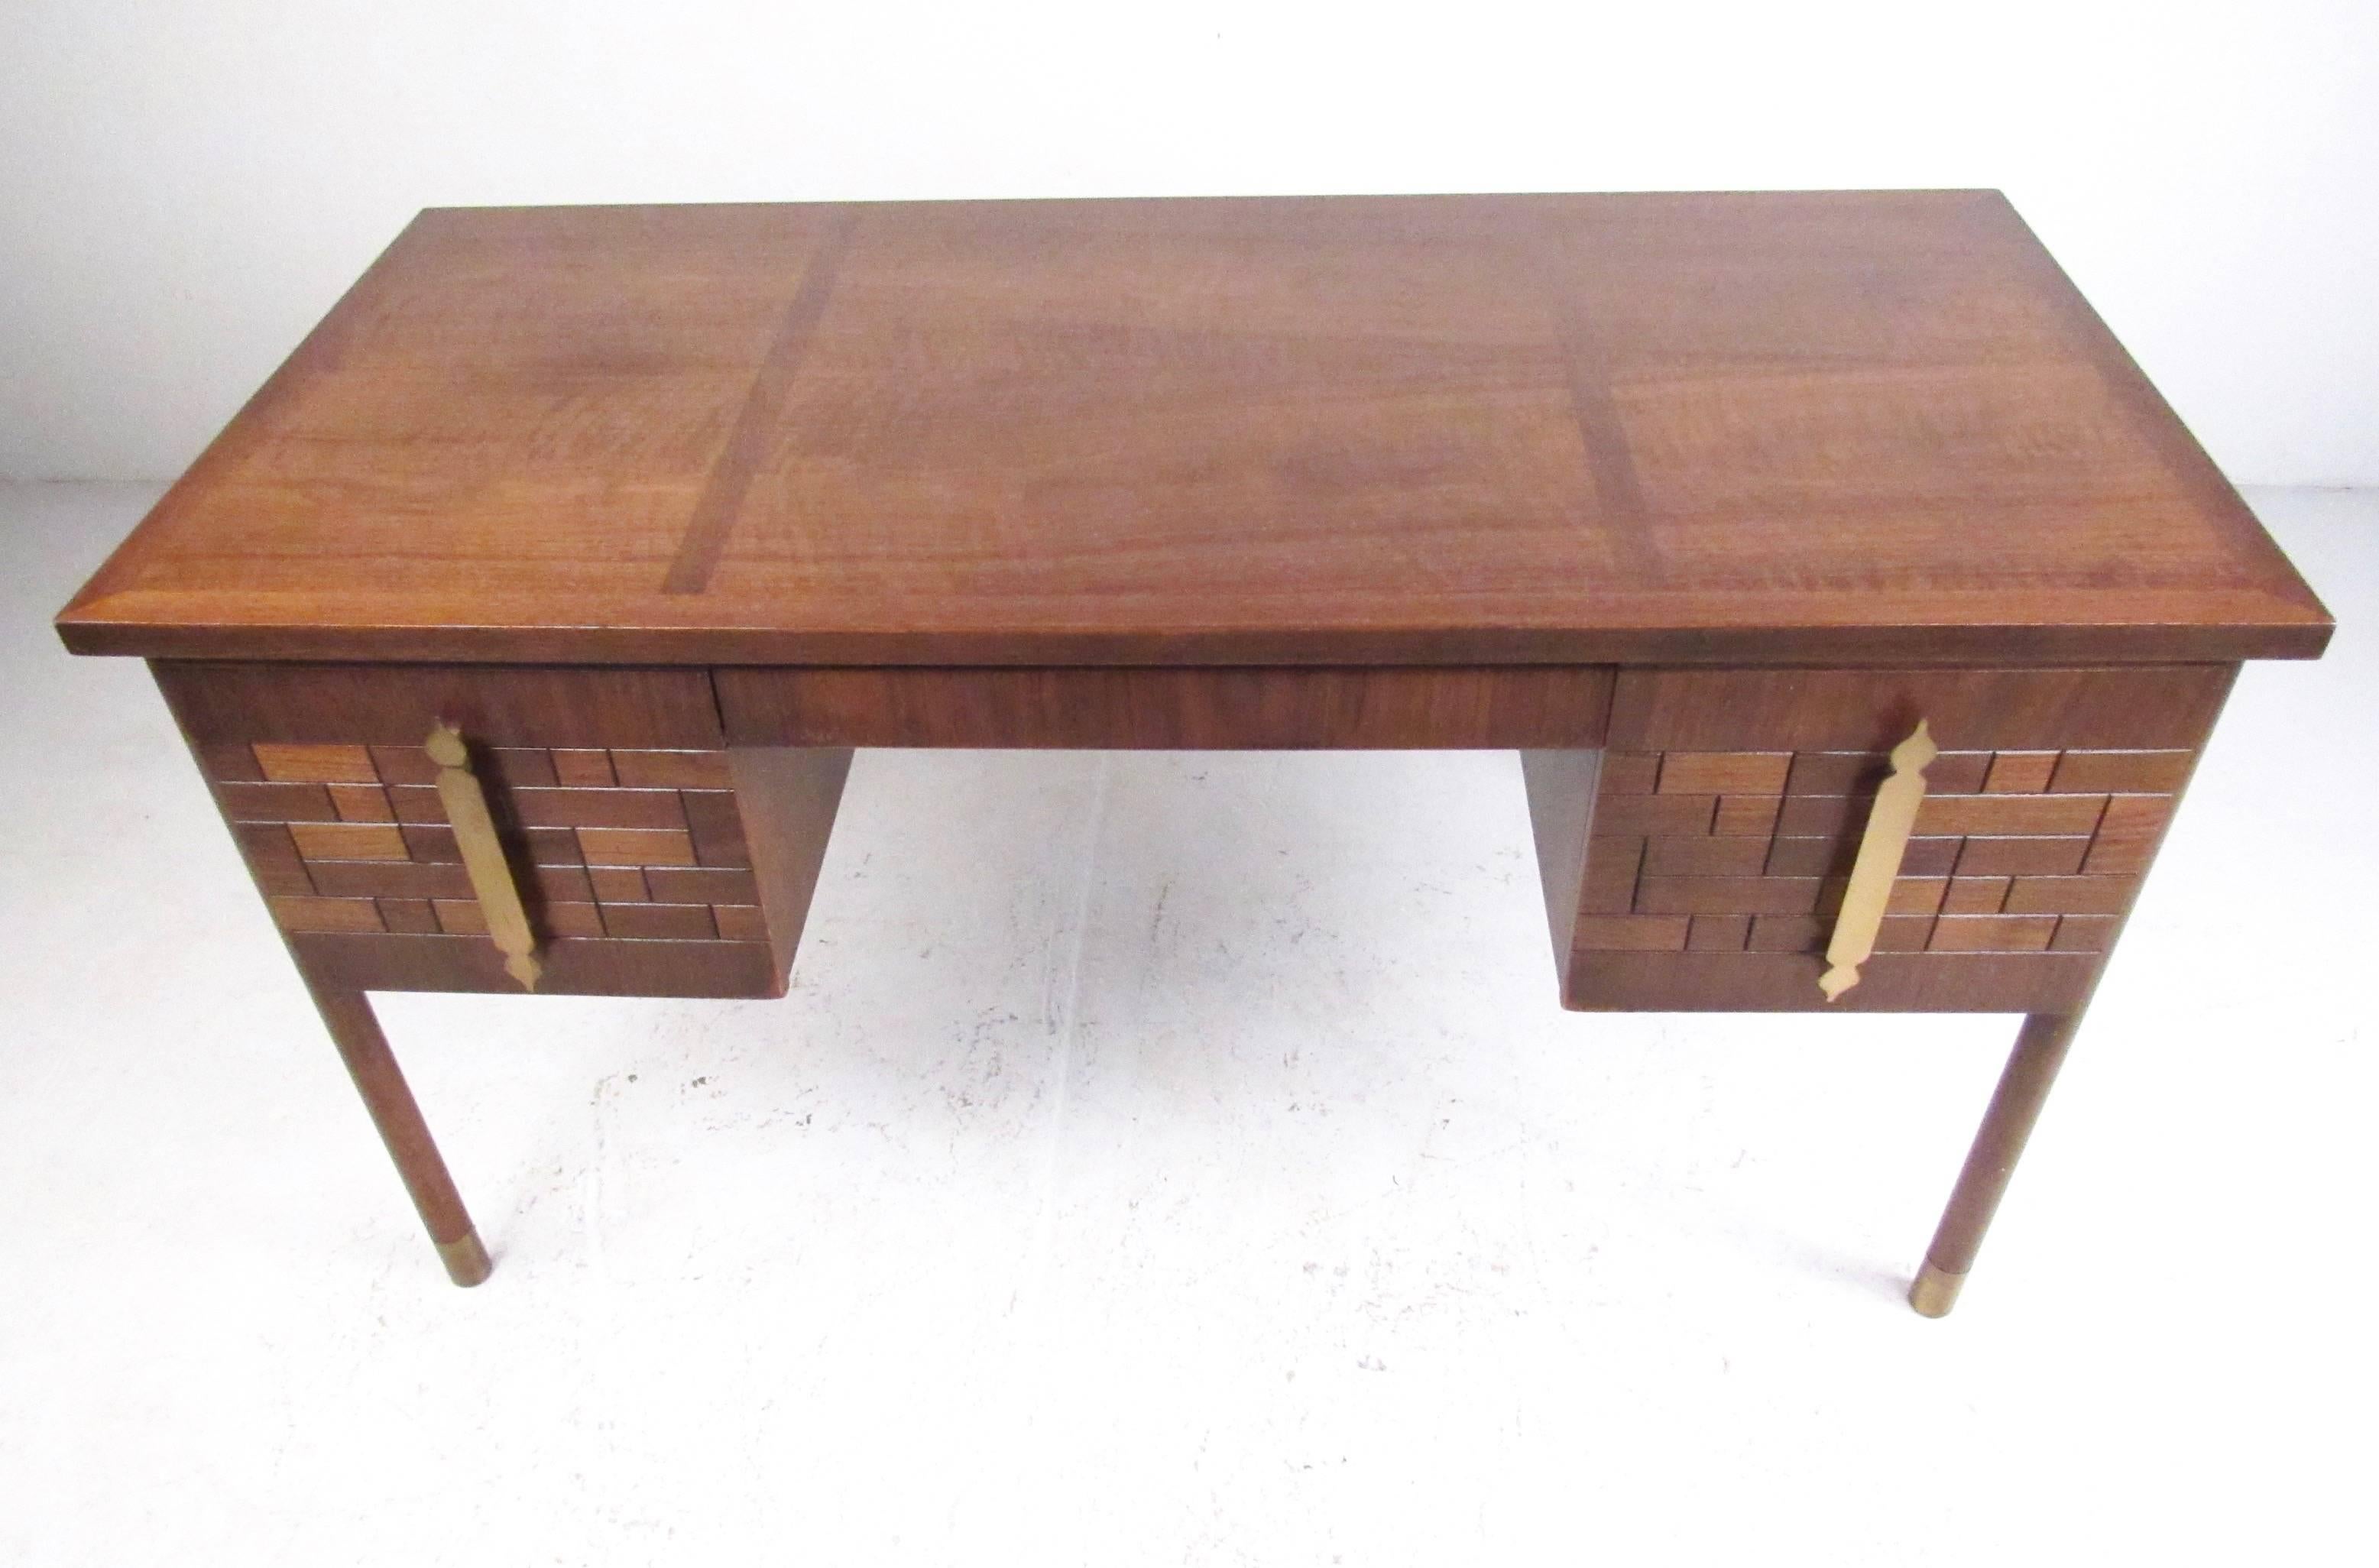 This stylish vintage walnut desk by Bert England for Johnson Brothers feature sculptural walnut fronts with unique parquetry finish. Impressive brass handles showcase the iconic midcentury design of the Bert England Trend Collection. Please confirm